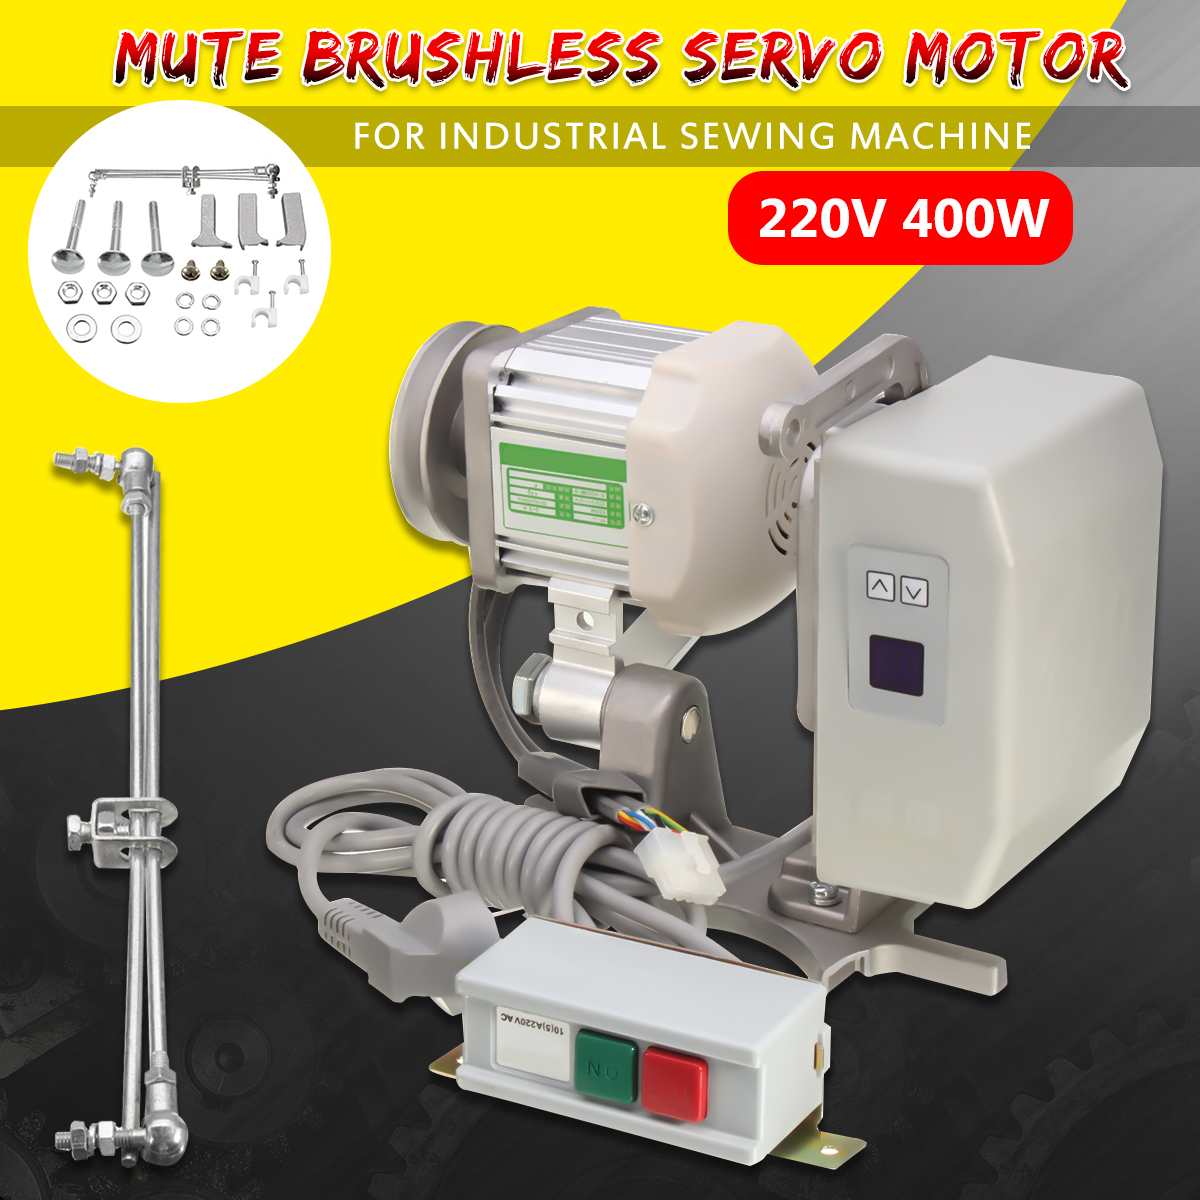 Brushless Servo Motor for Industrial Sewing Machines